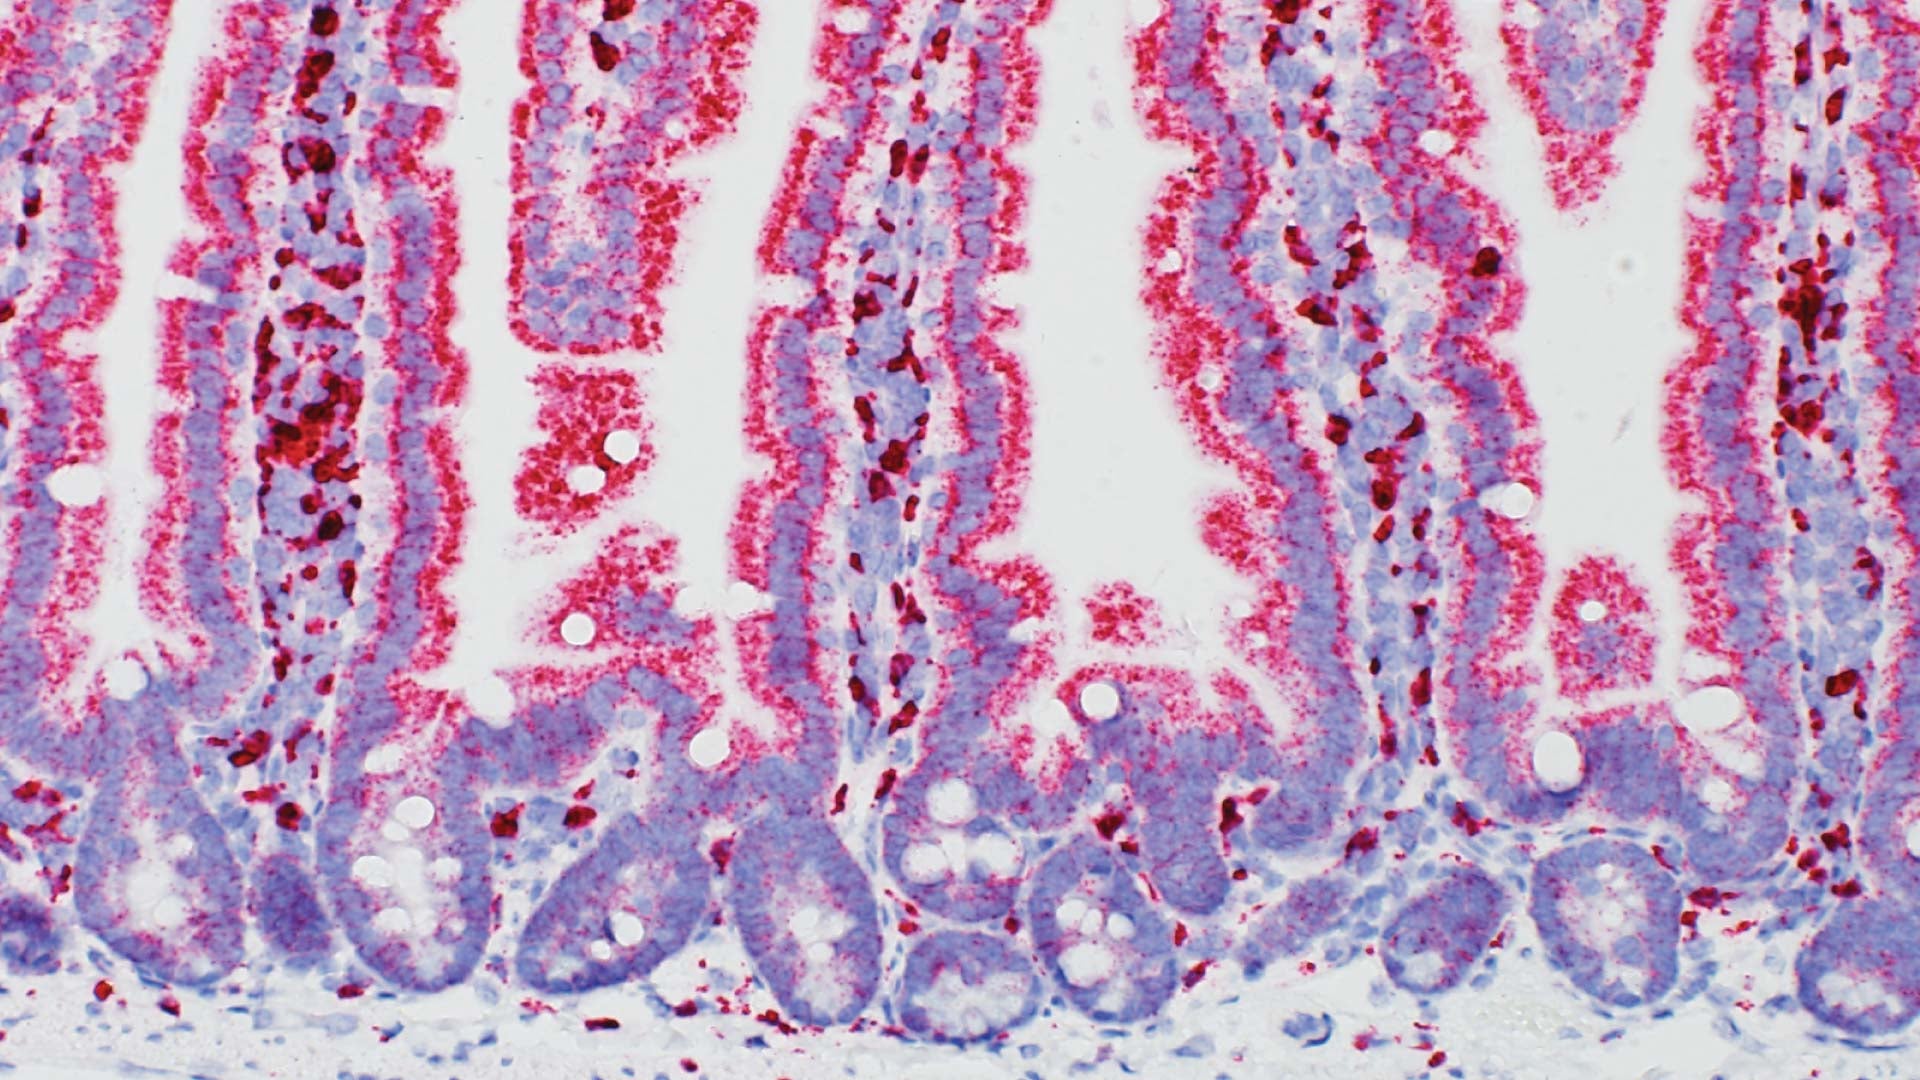 microscopic image of a normal mouse small intestine